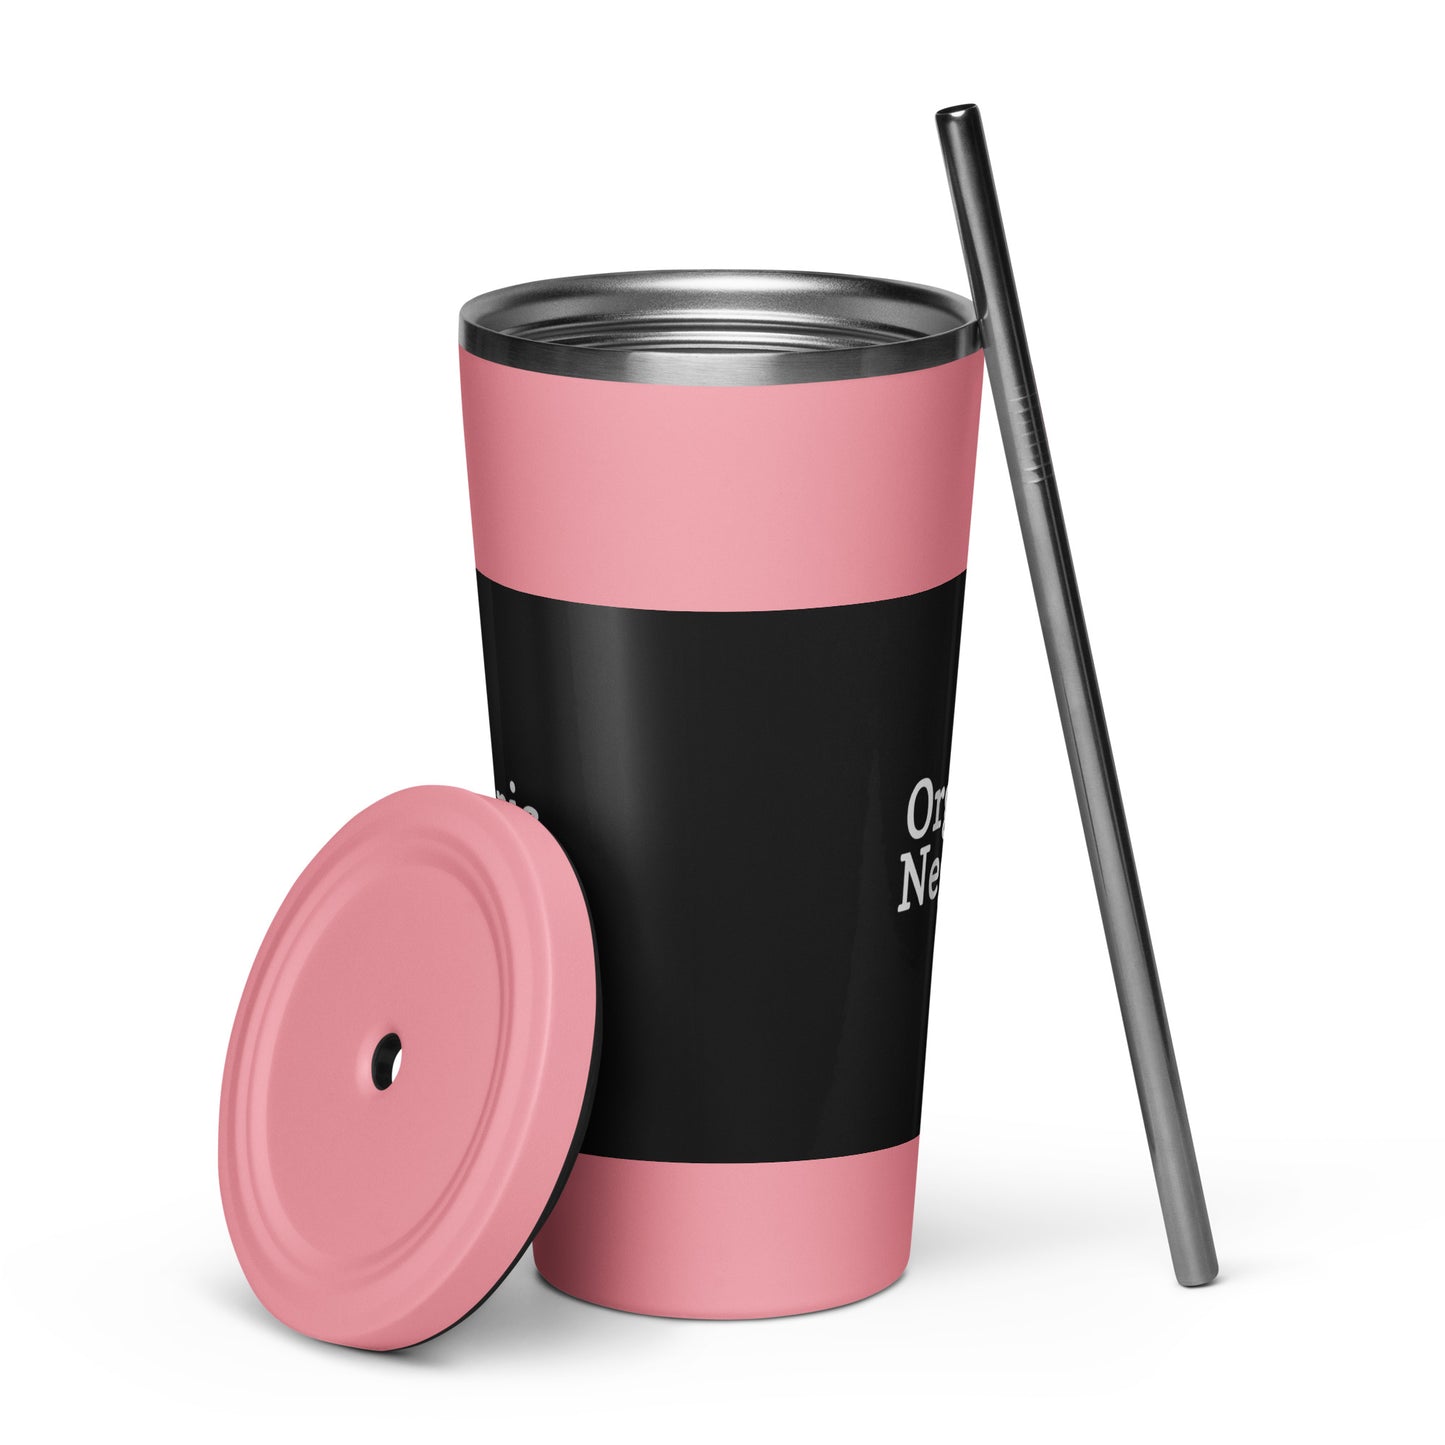 Organic Negrow Tumbler / Insulated tumbler with a straw